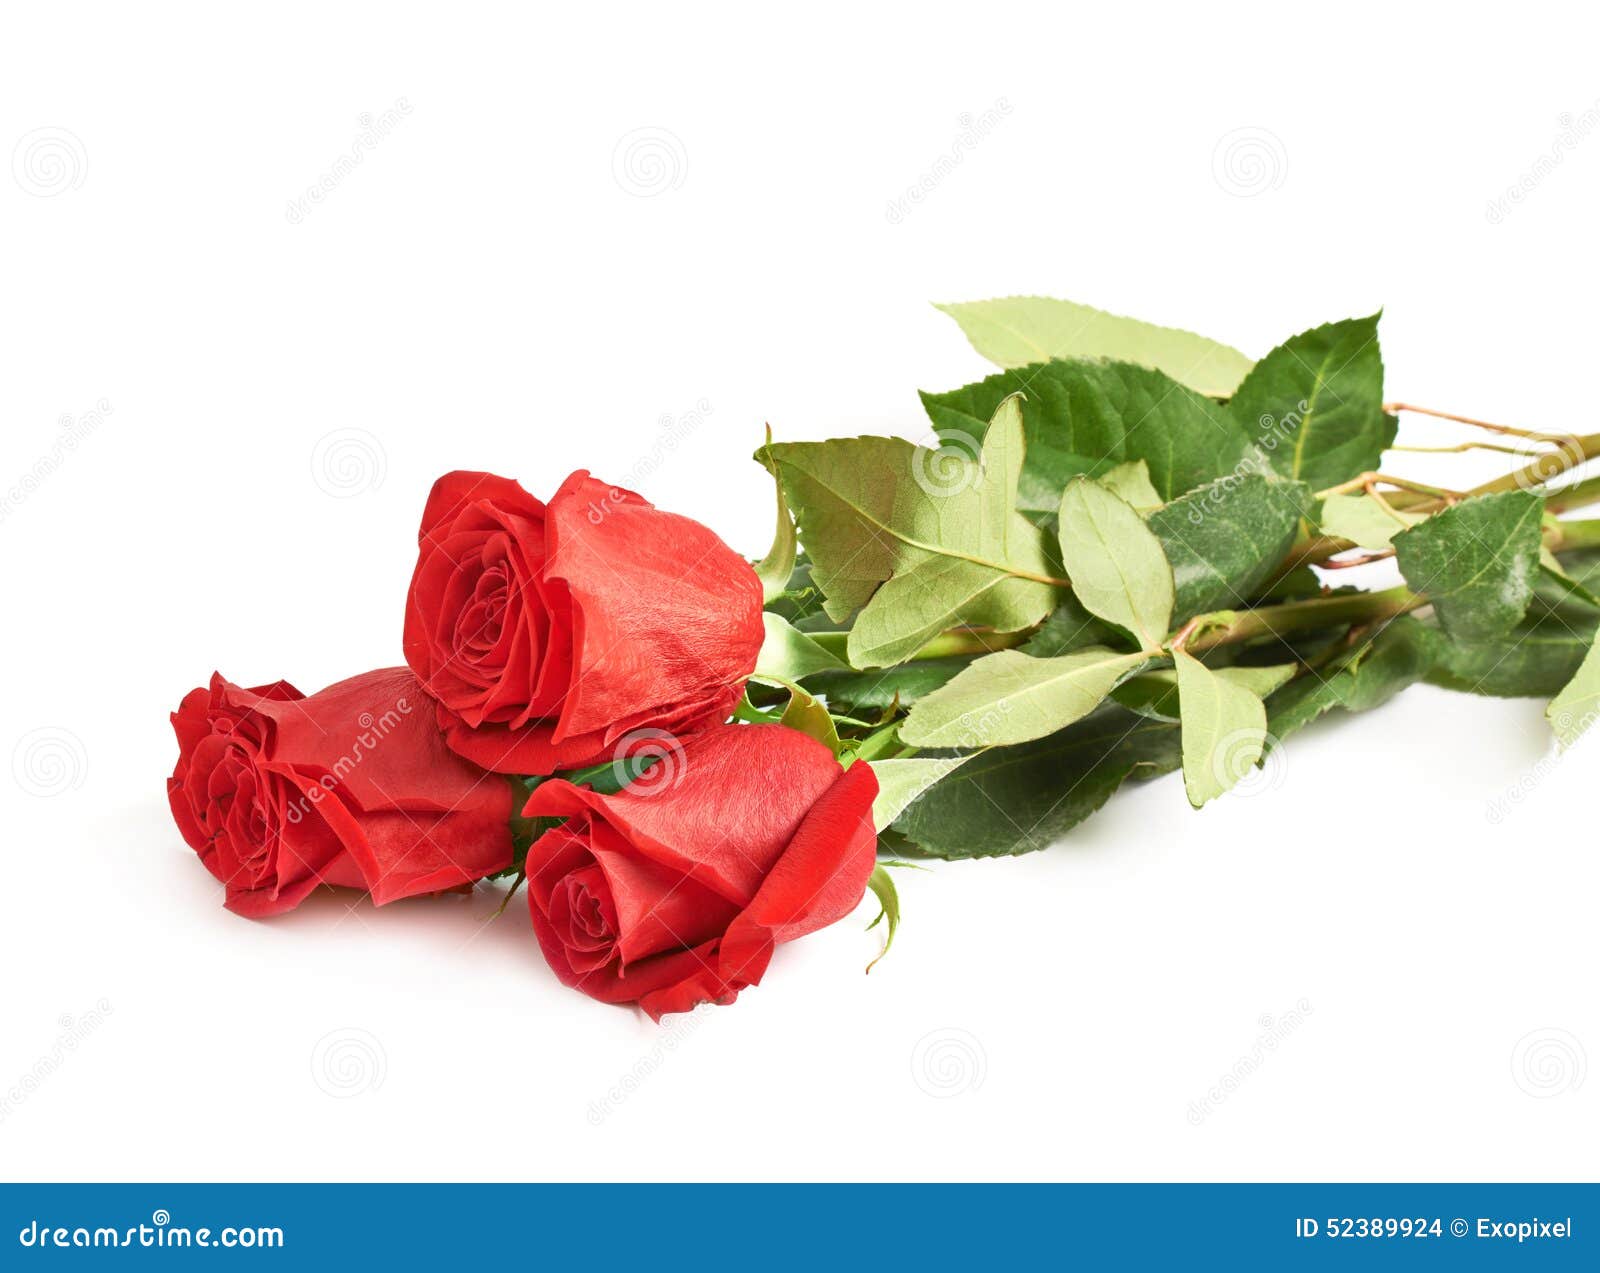 Three red roses isolated stock photo. Image of flower - 52389924